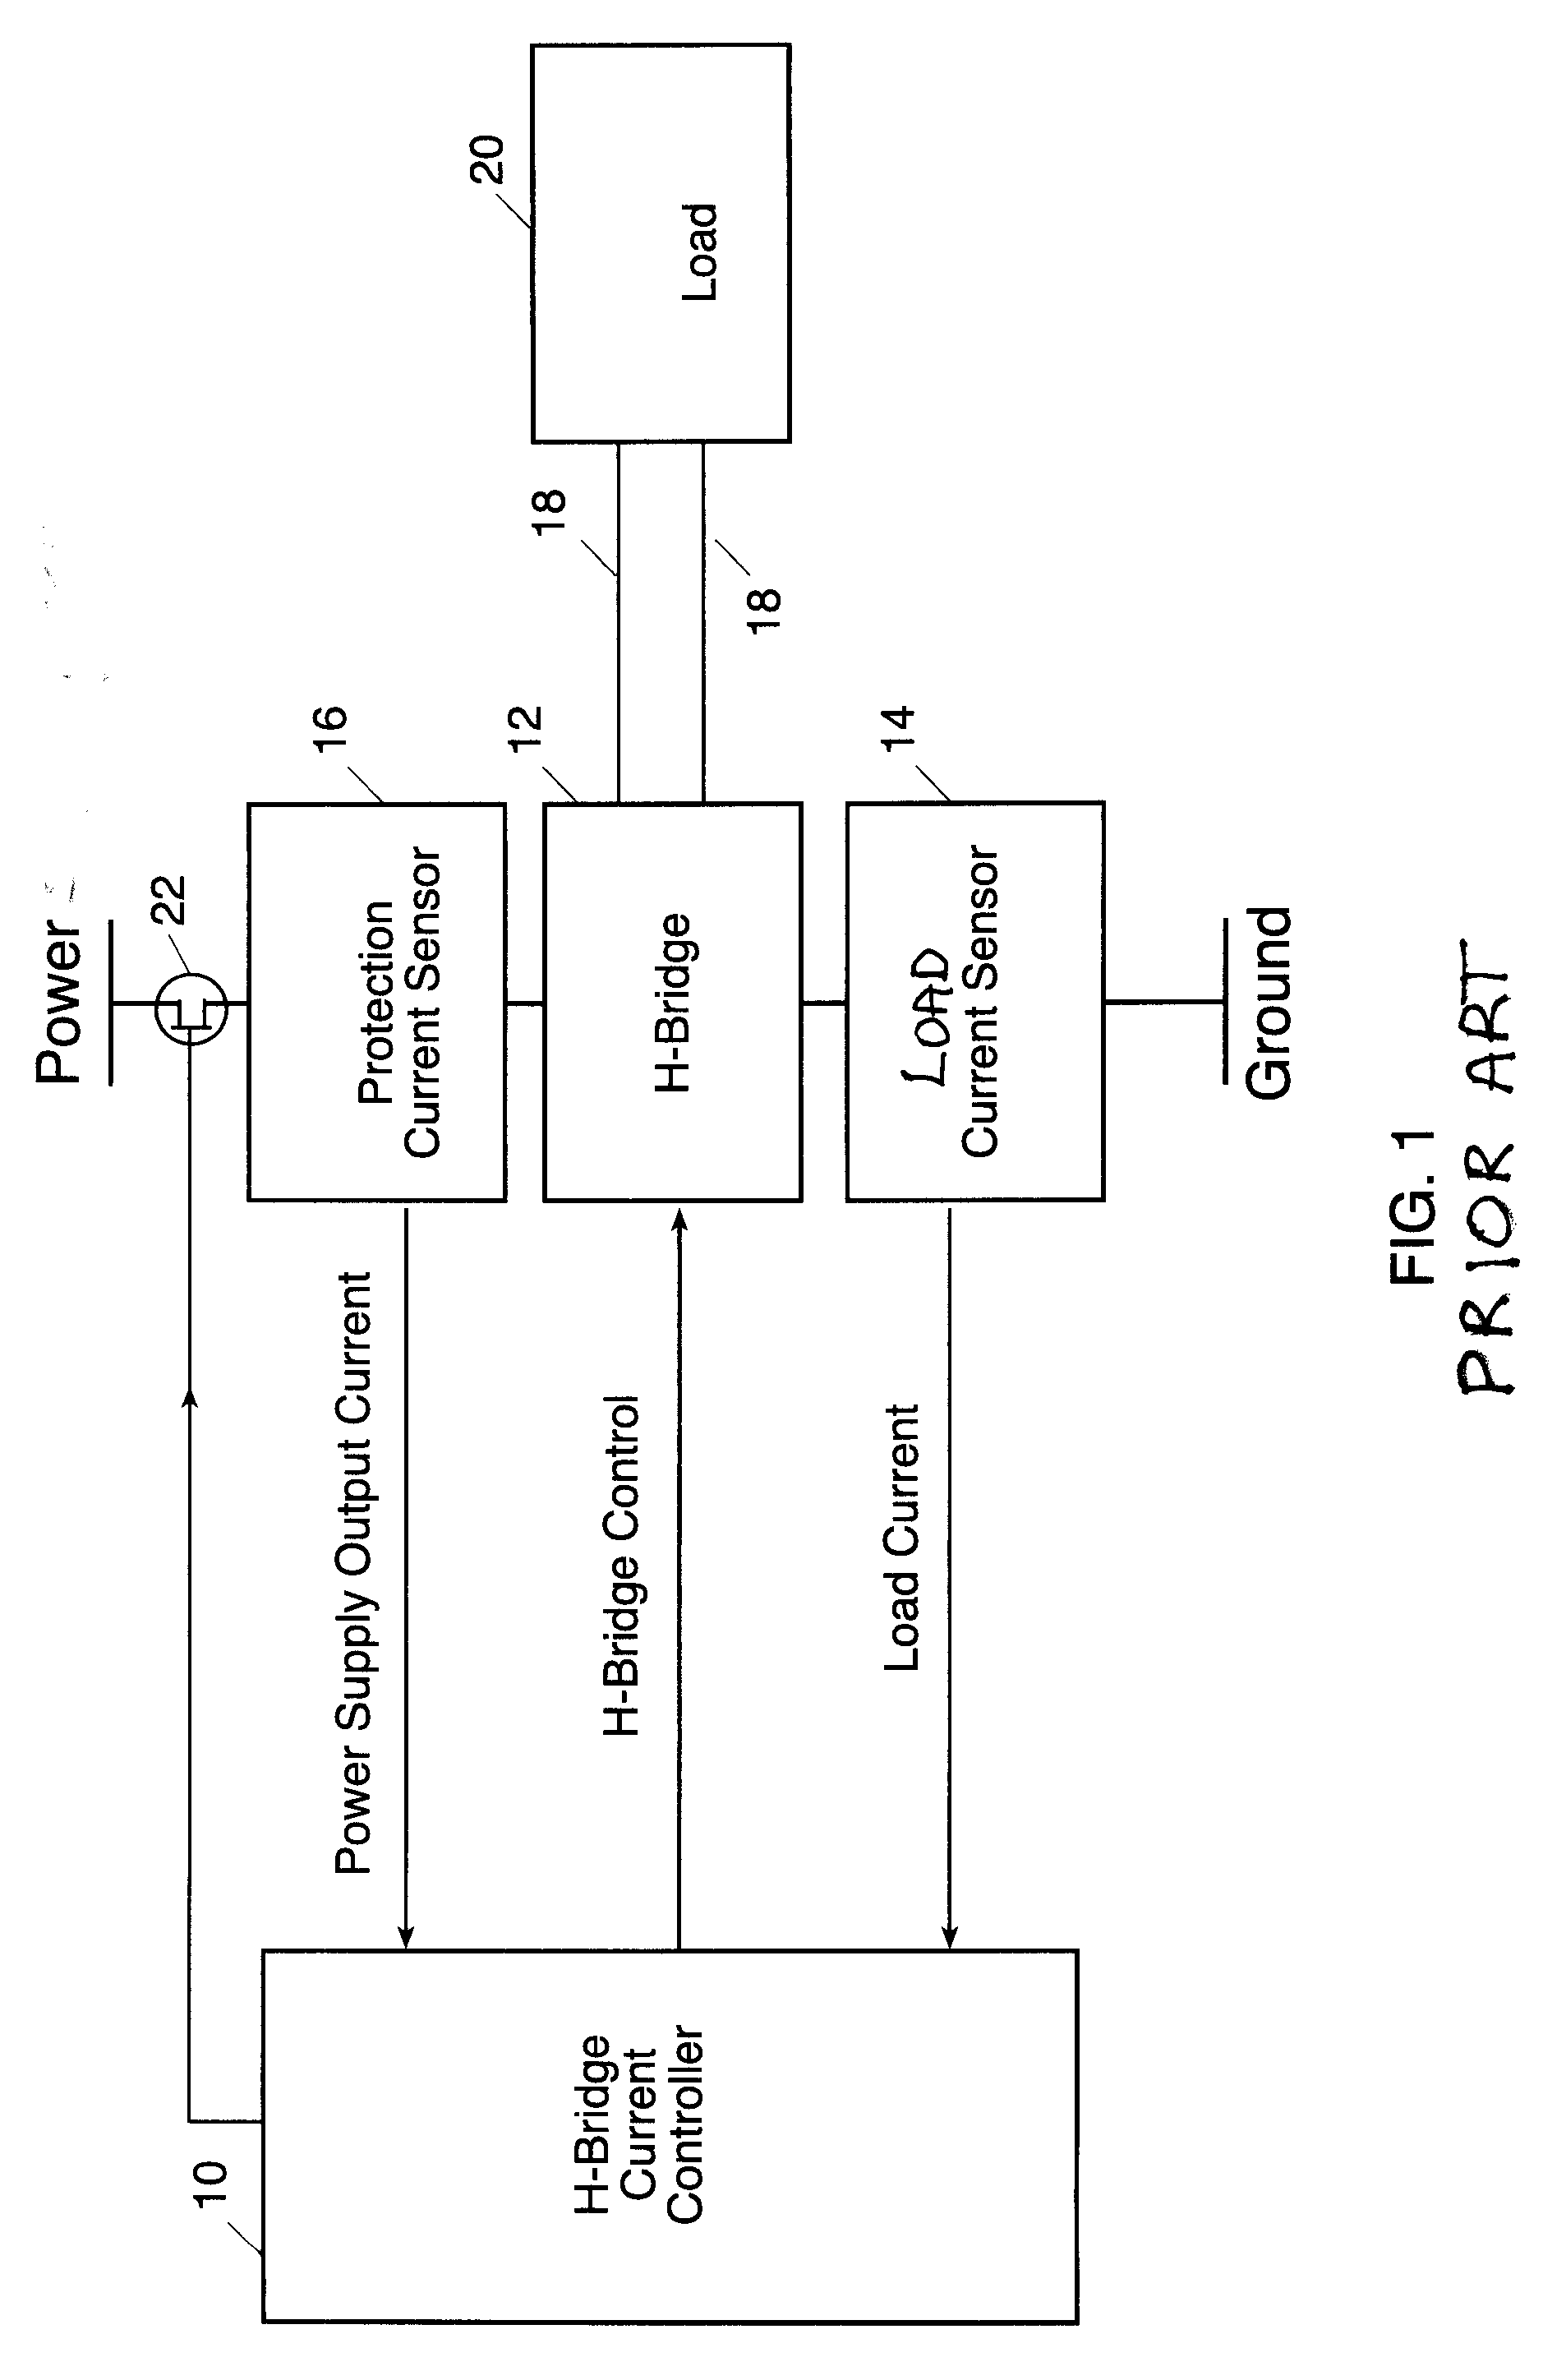 Apparatus and method for current control in h-bridge load drivers